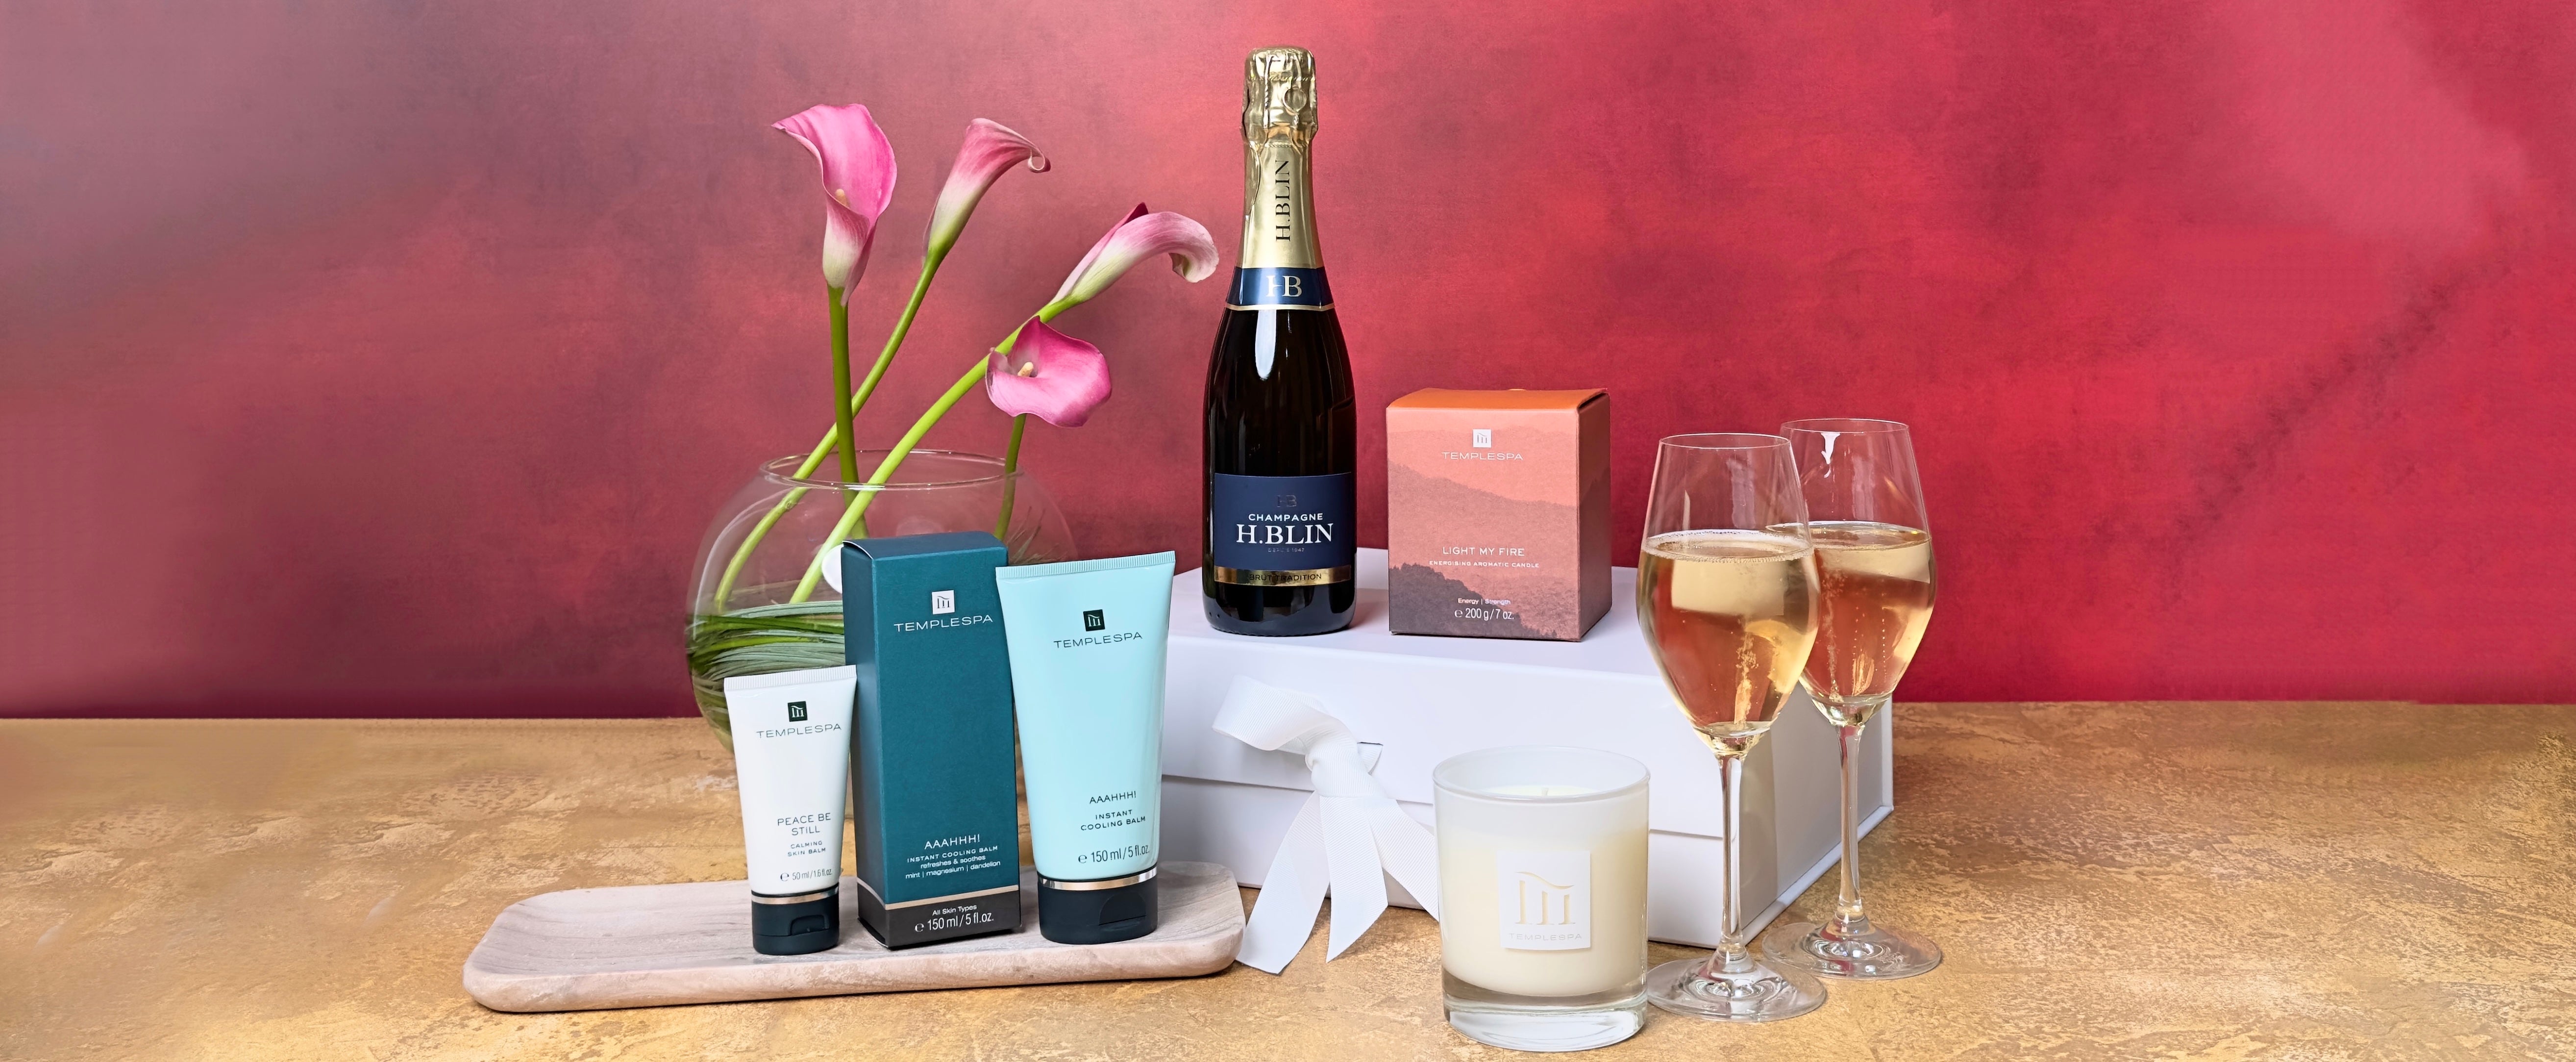 Treat yourself or a loved one with luxurious Pamper Hampers and Gifts featuring TempleSpa